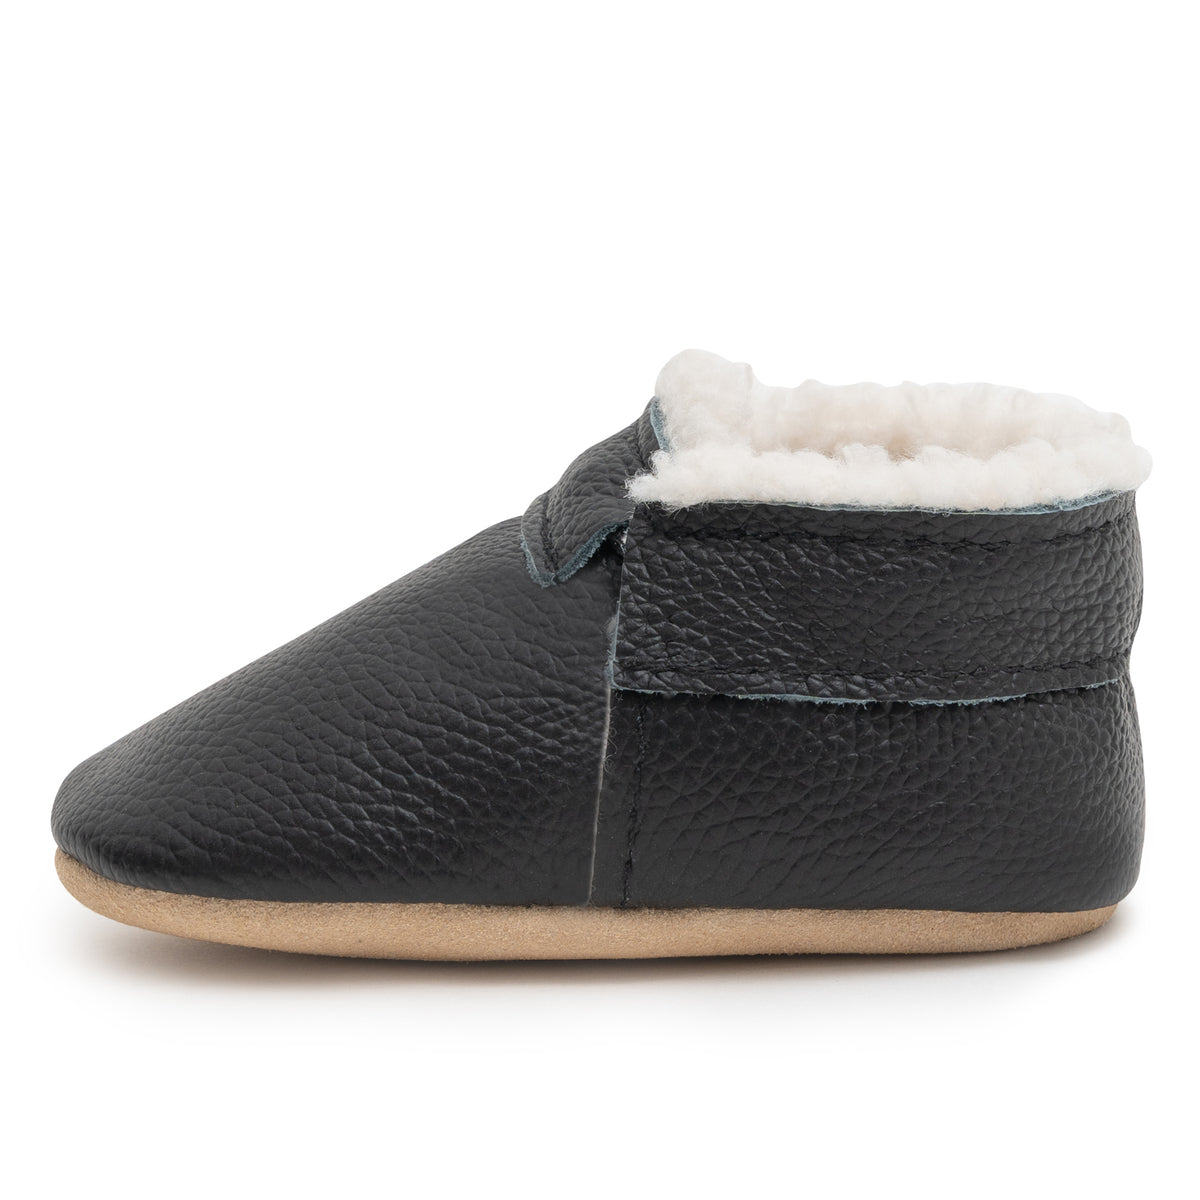 Fringeless Black and Tan Sherpa Moccasins